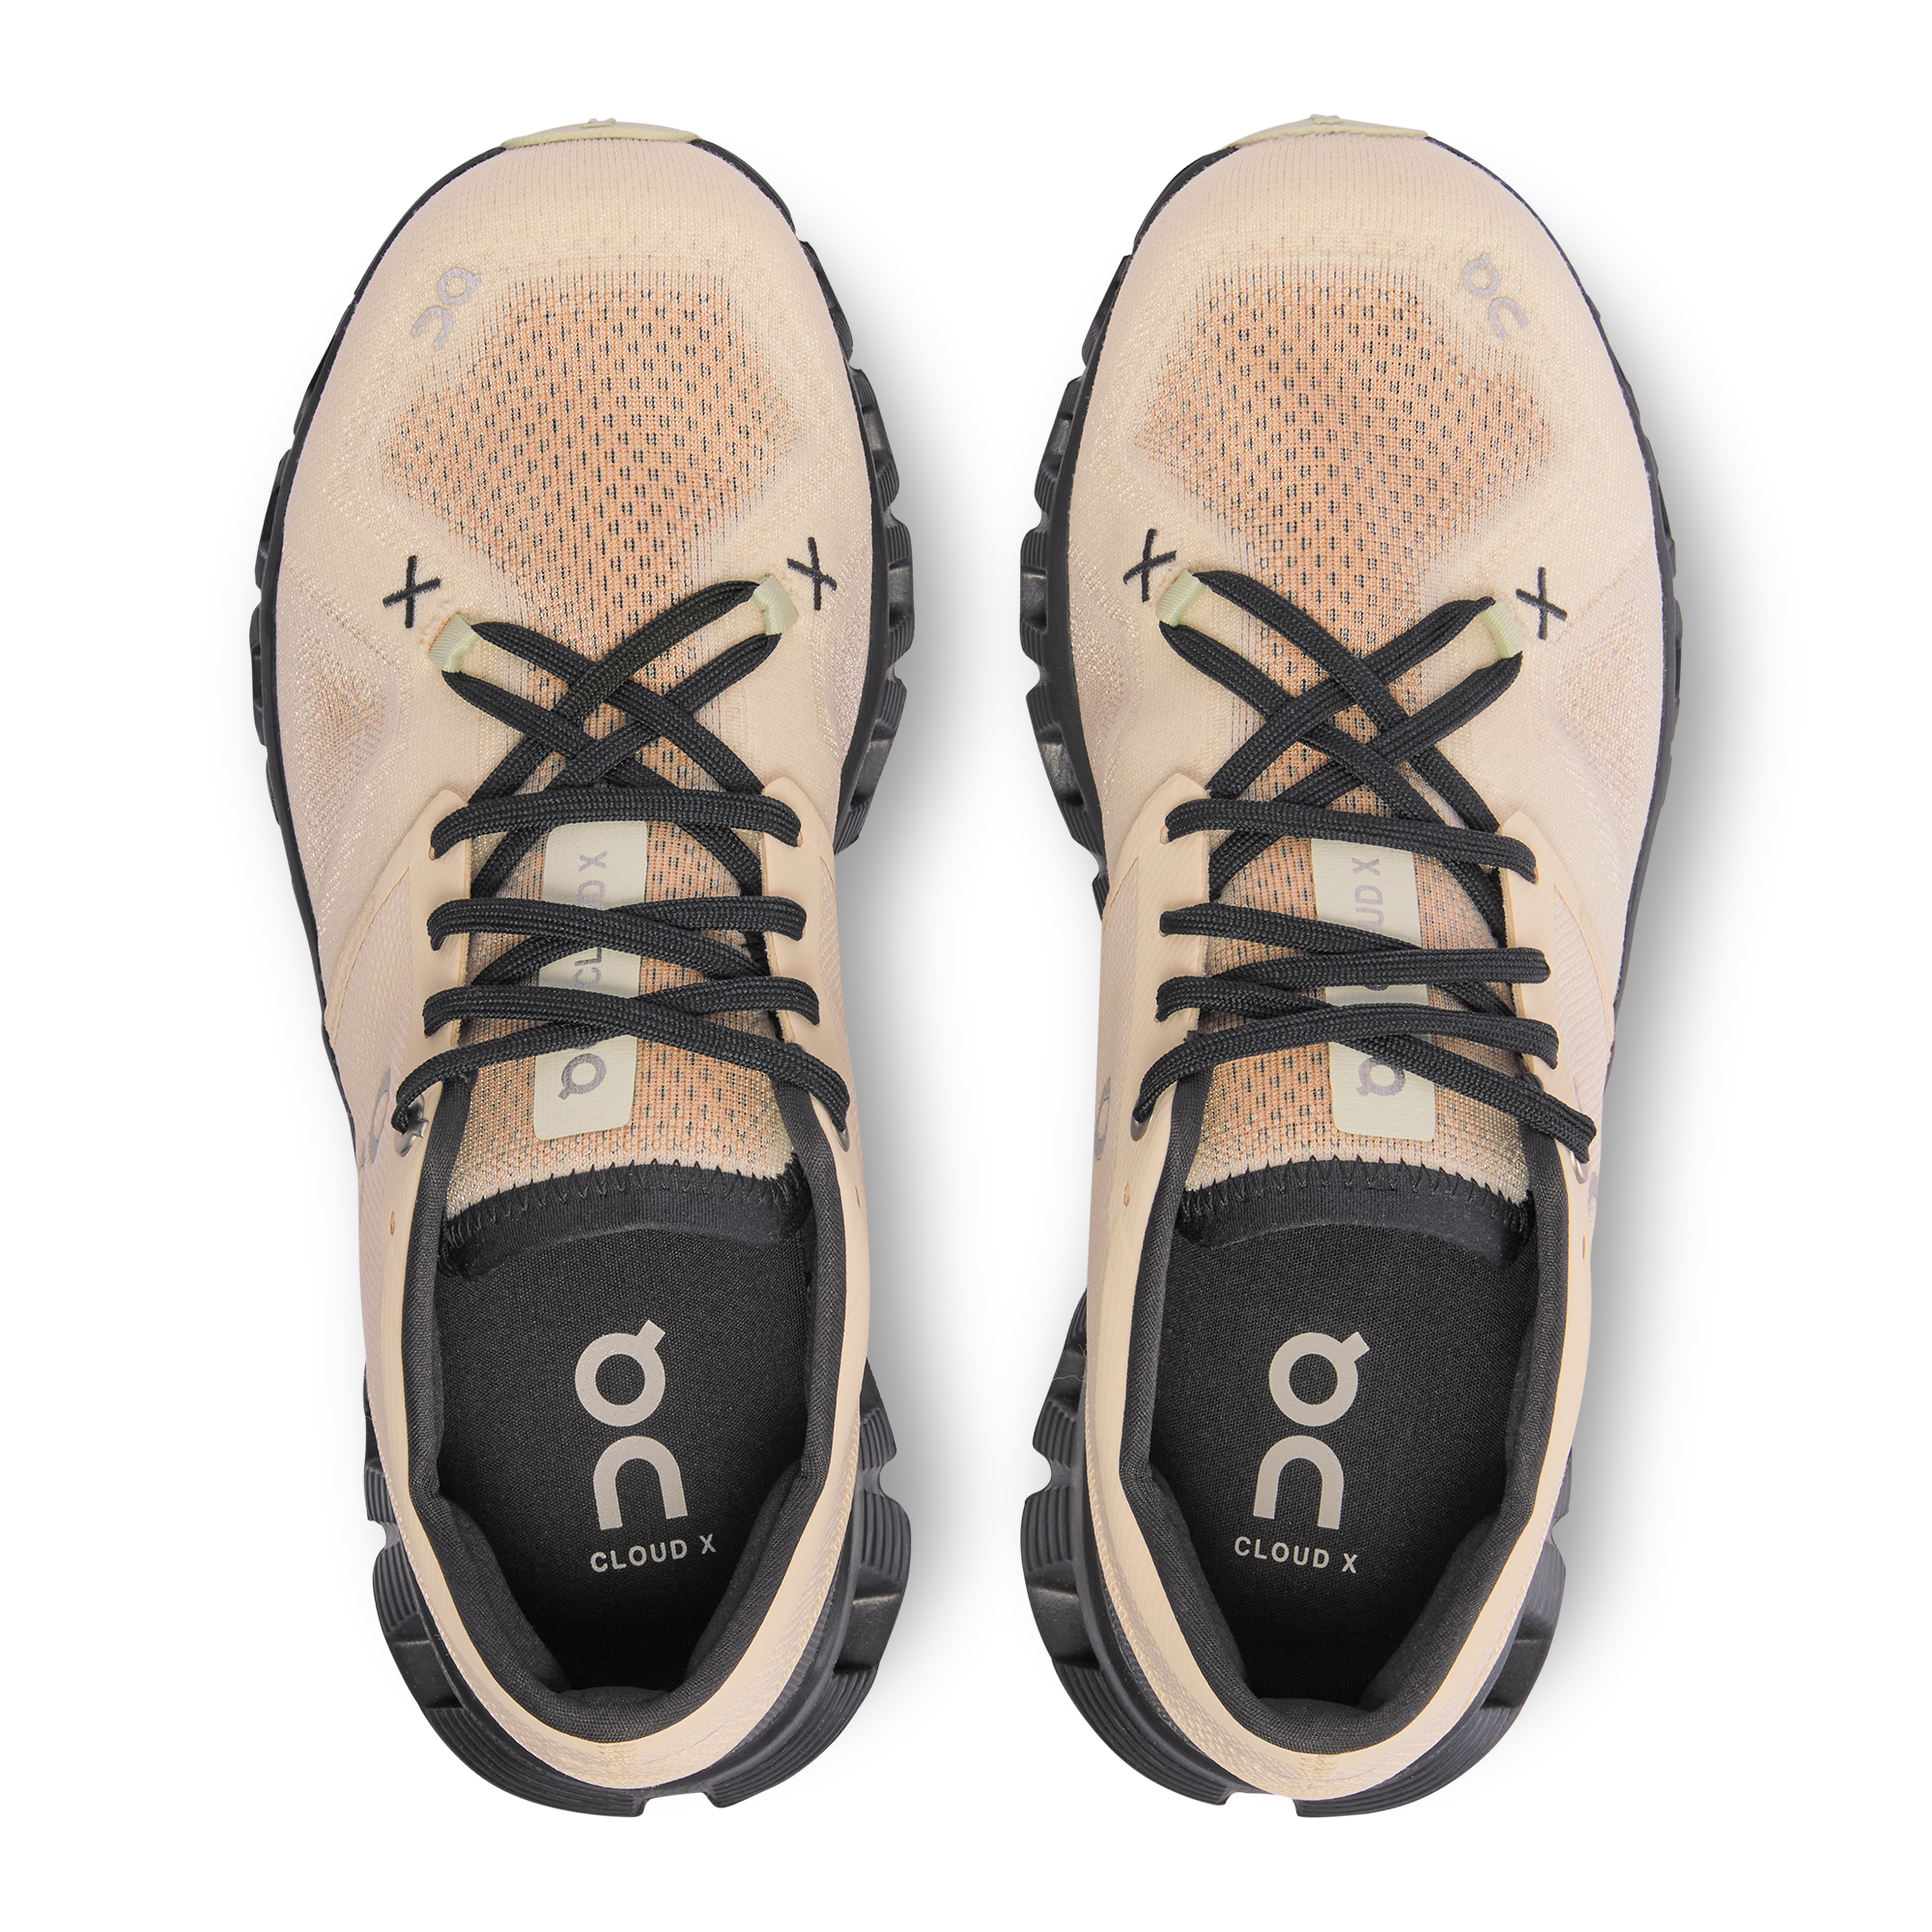 The Cloud X 3: Reactive shoe for multiple workouts | On United States